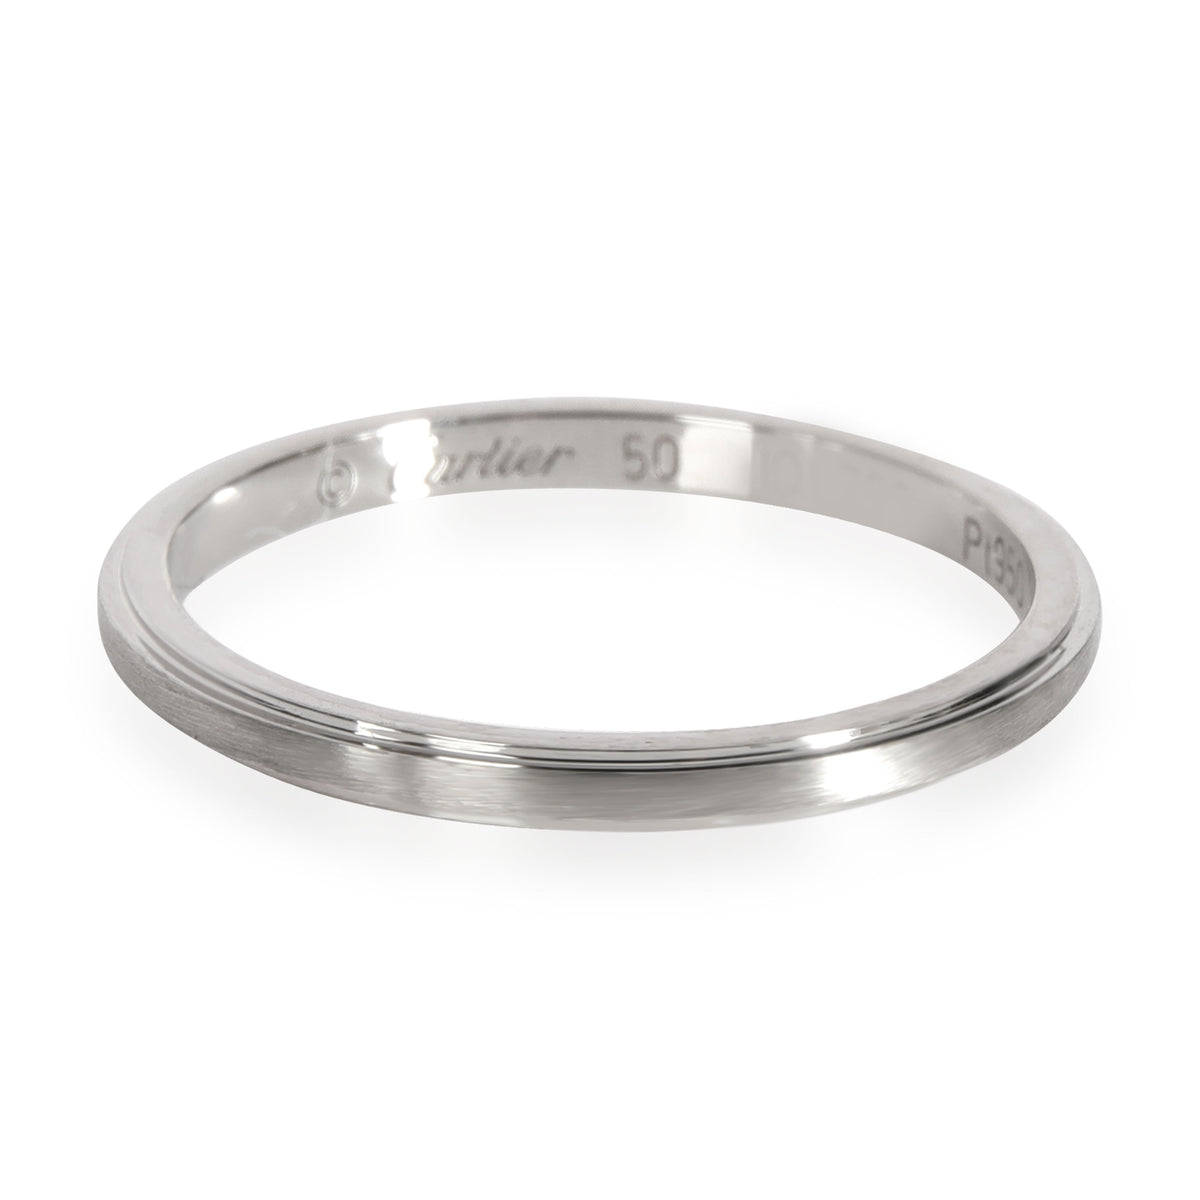 Cartier D'Amour Wedding Band in Platinum